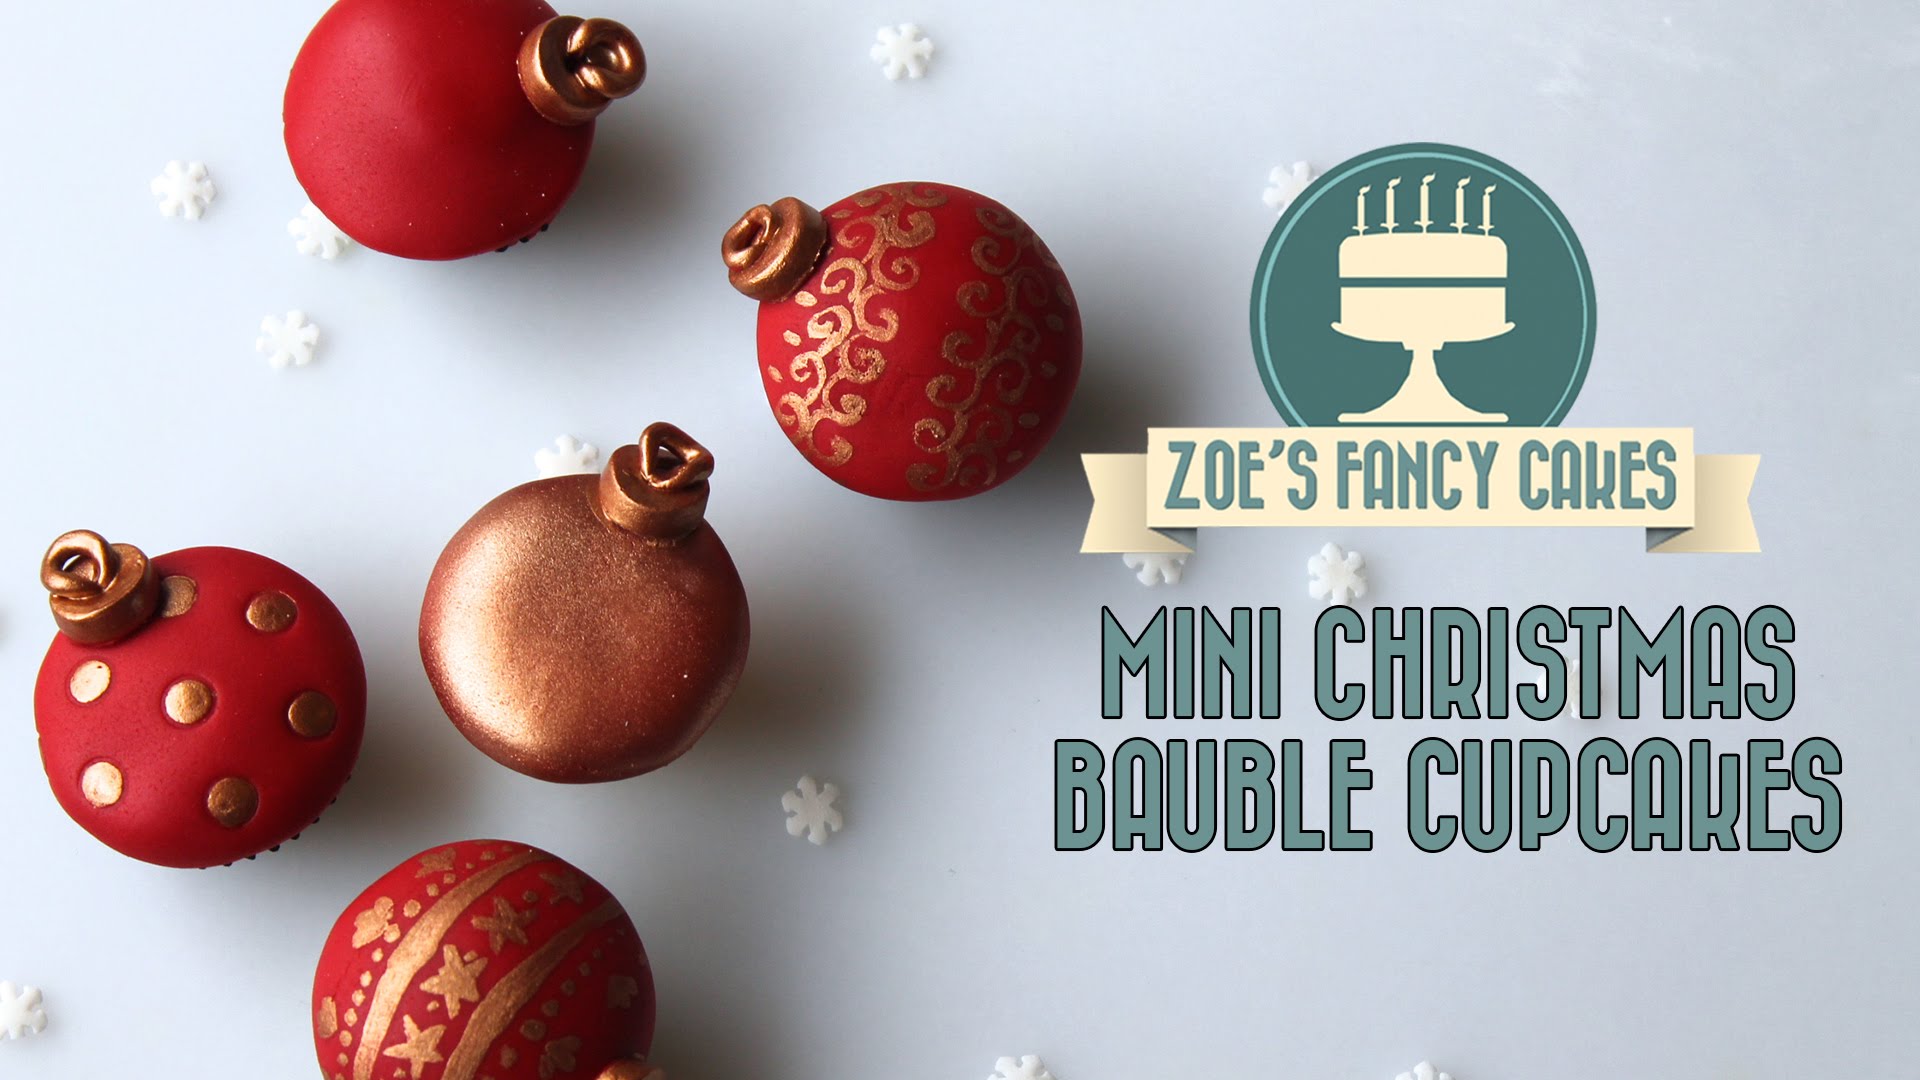 Christmas mini cupcake bauble decorations How To Cake Tutorial - YouTube